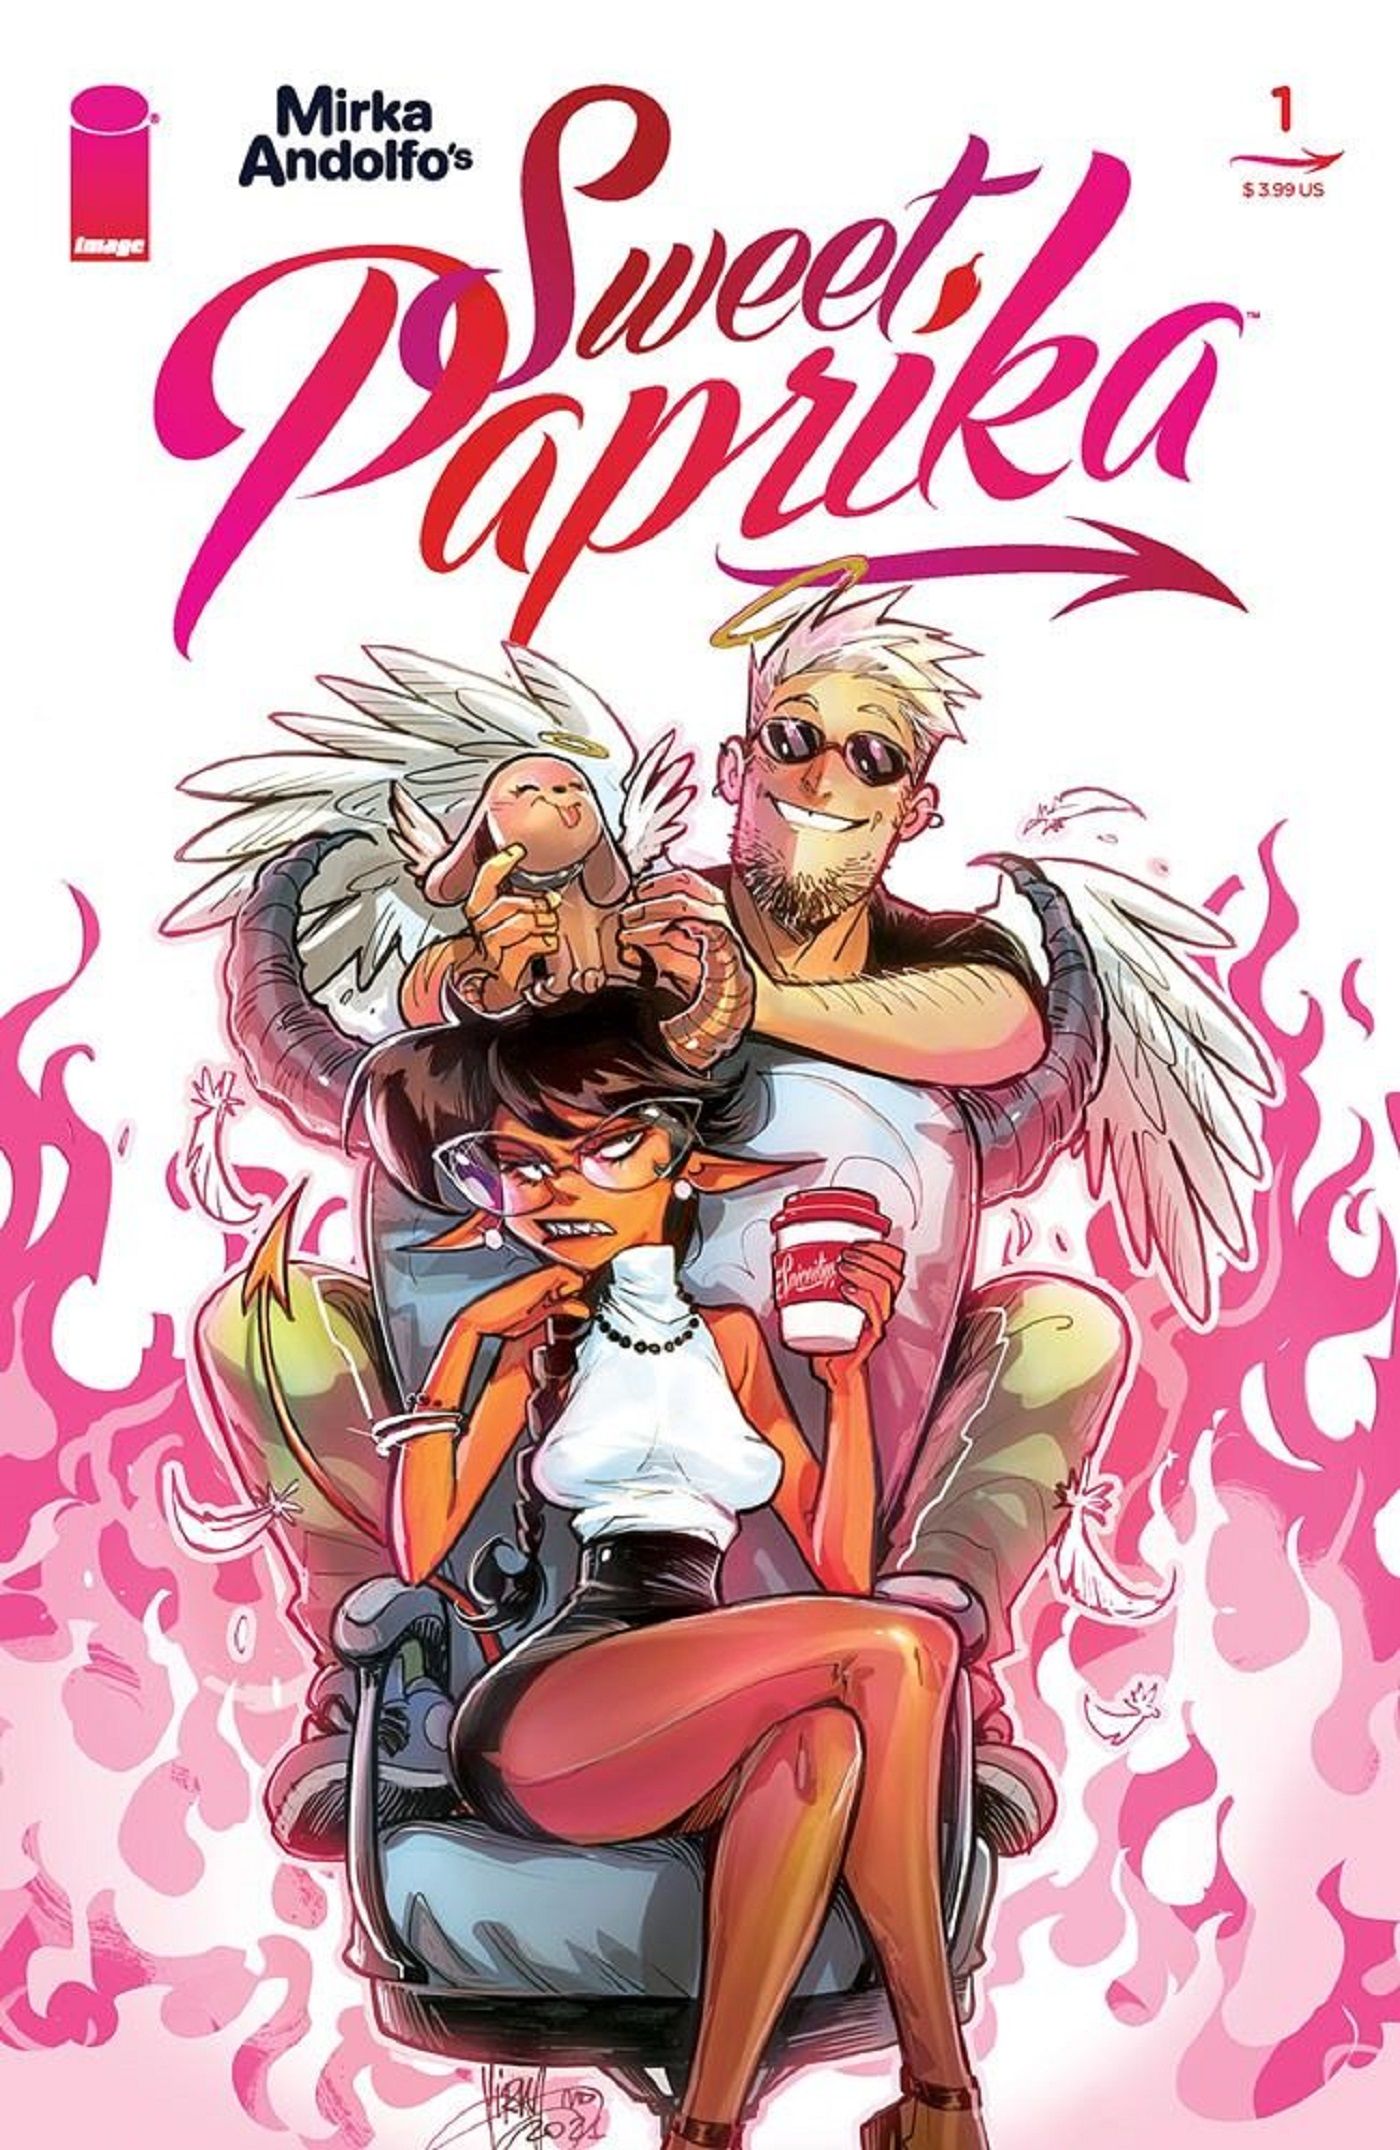 Exclusive Preview: Mirka Andolfo’s Sweet Paprika #1